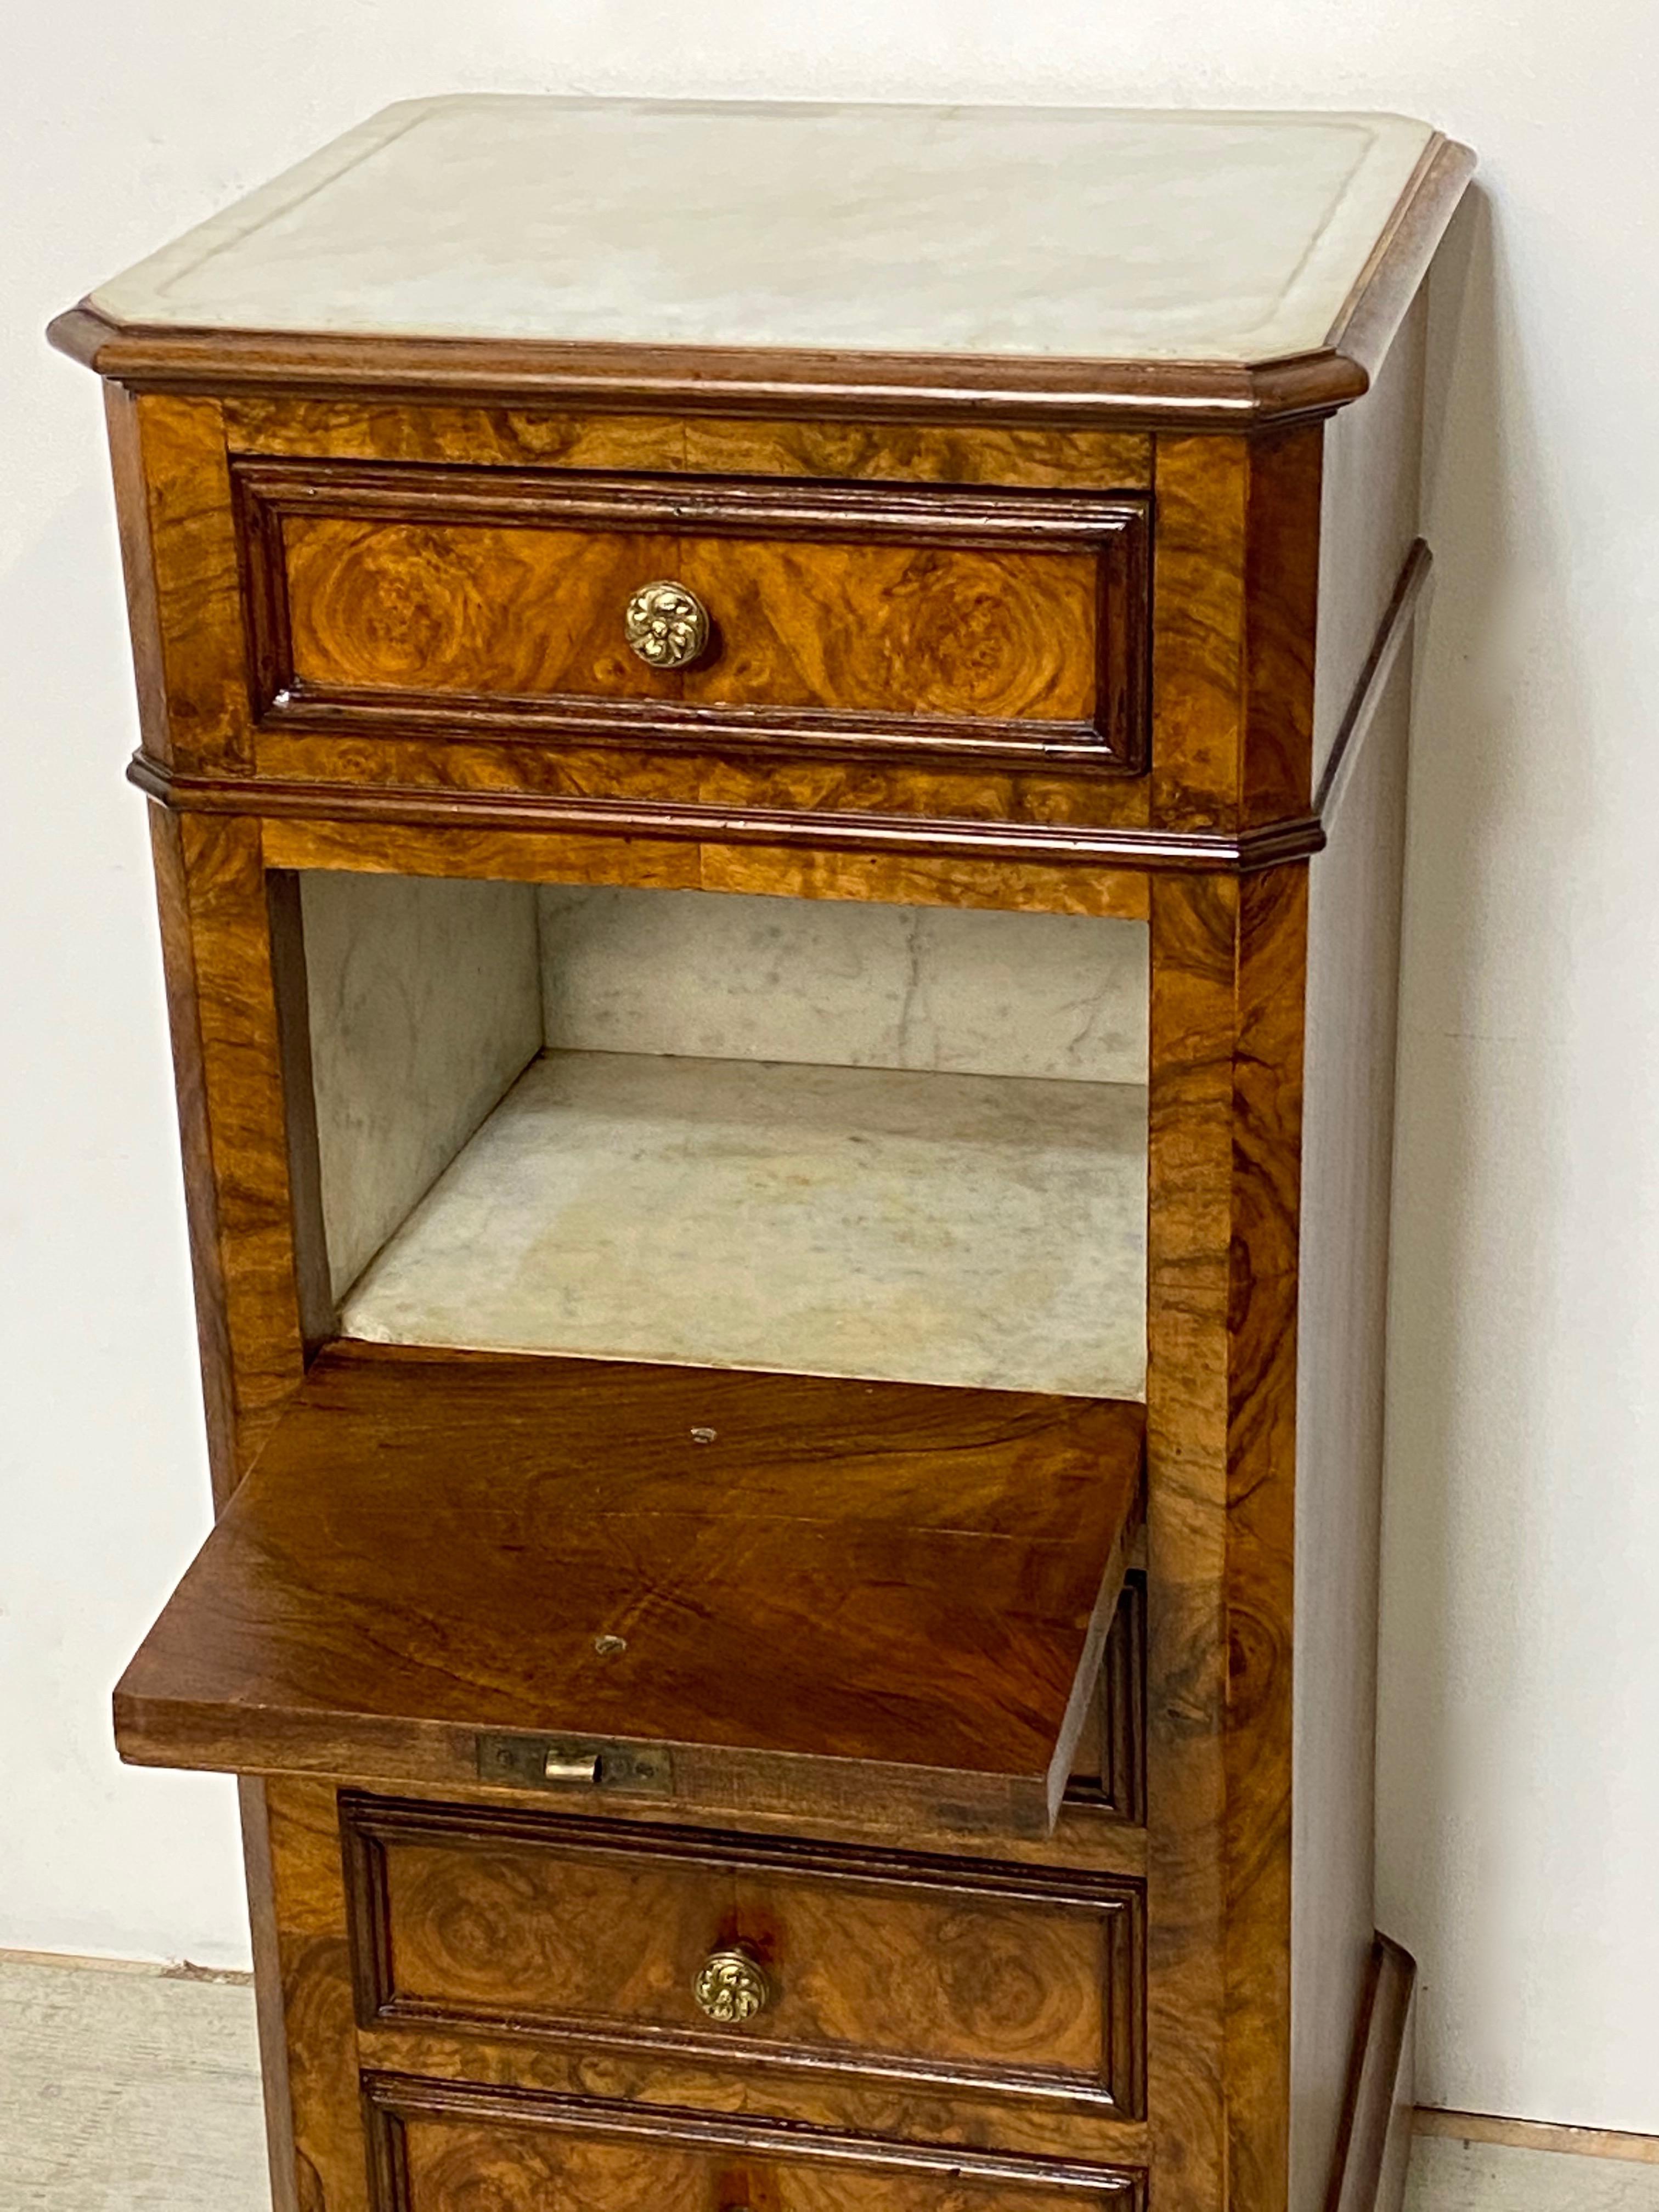 Victorian French Burled Walnut and Marble Bedside Commode Cabinet, 19th Century